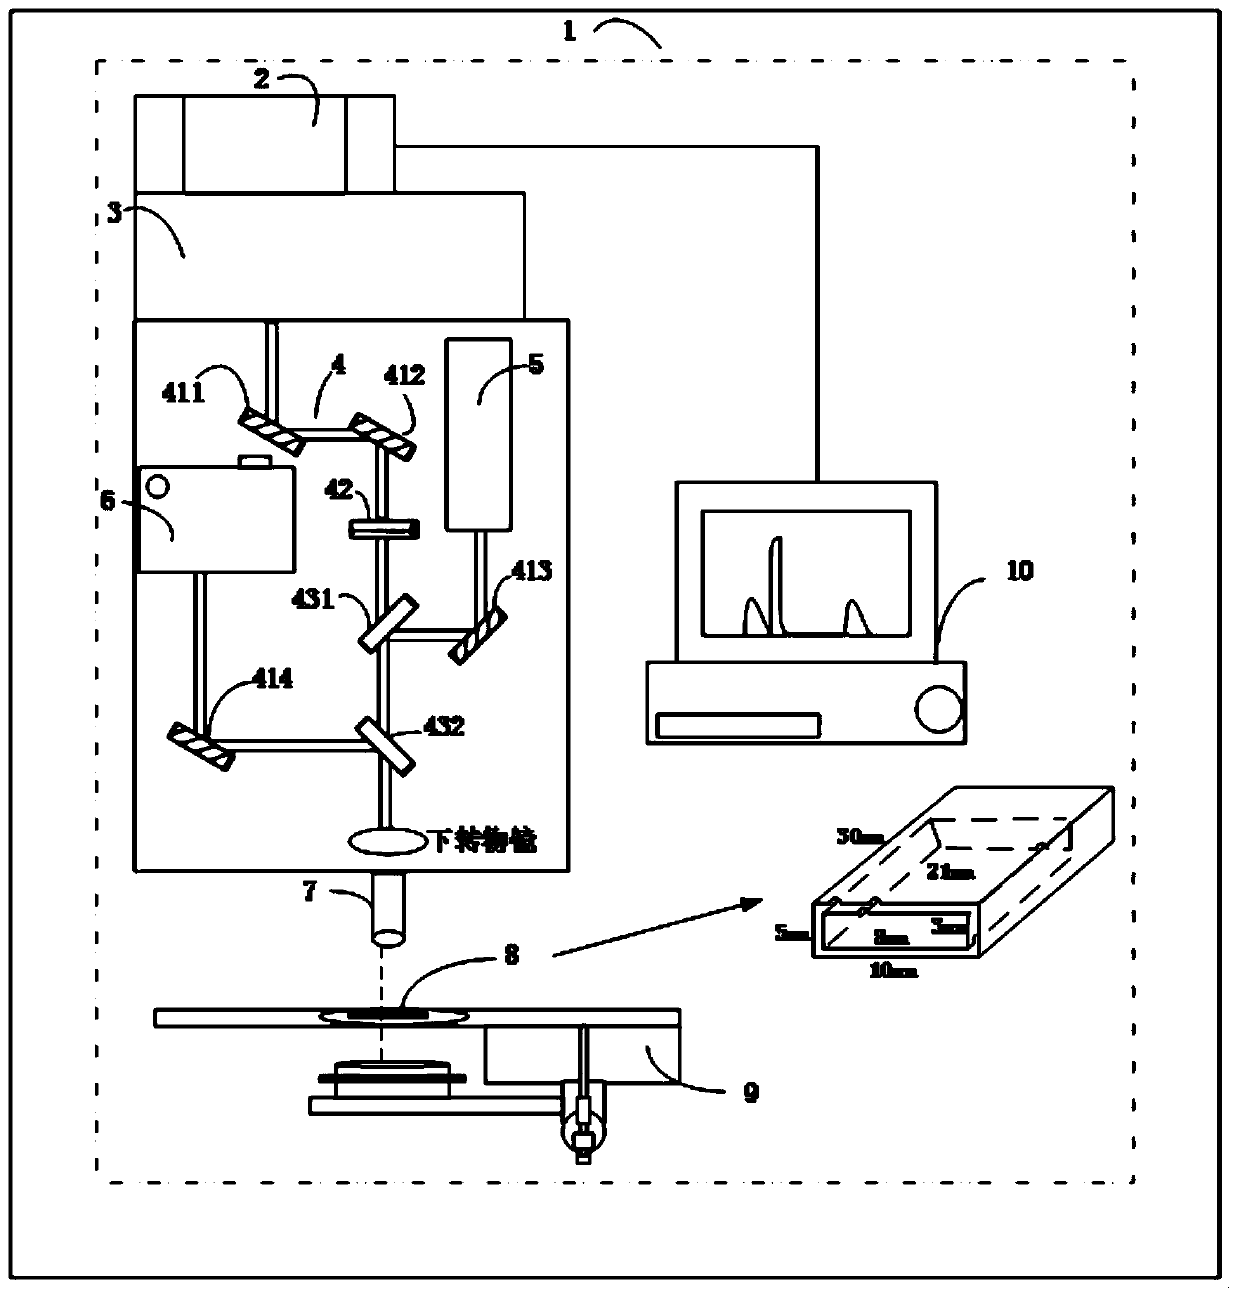 Portable Raman spectrum diagnosis device and method for oil-paper insulation aging state